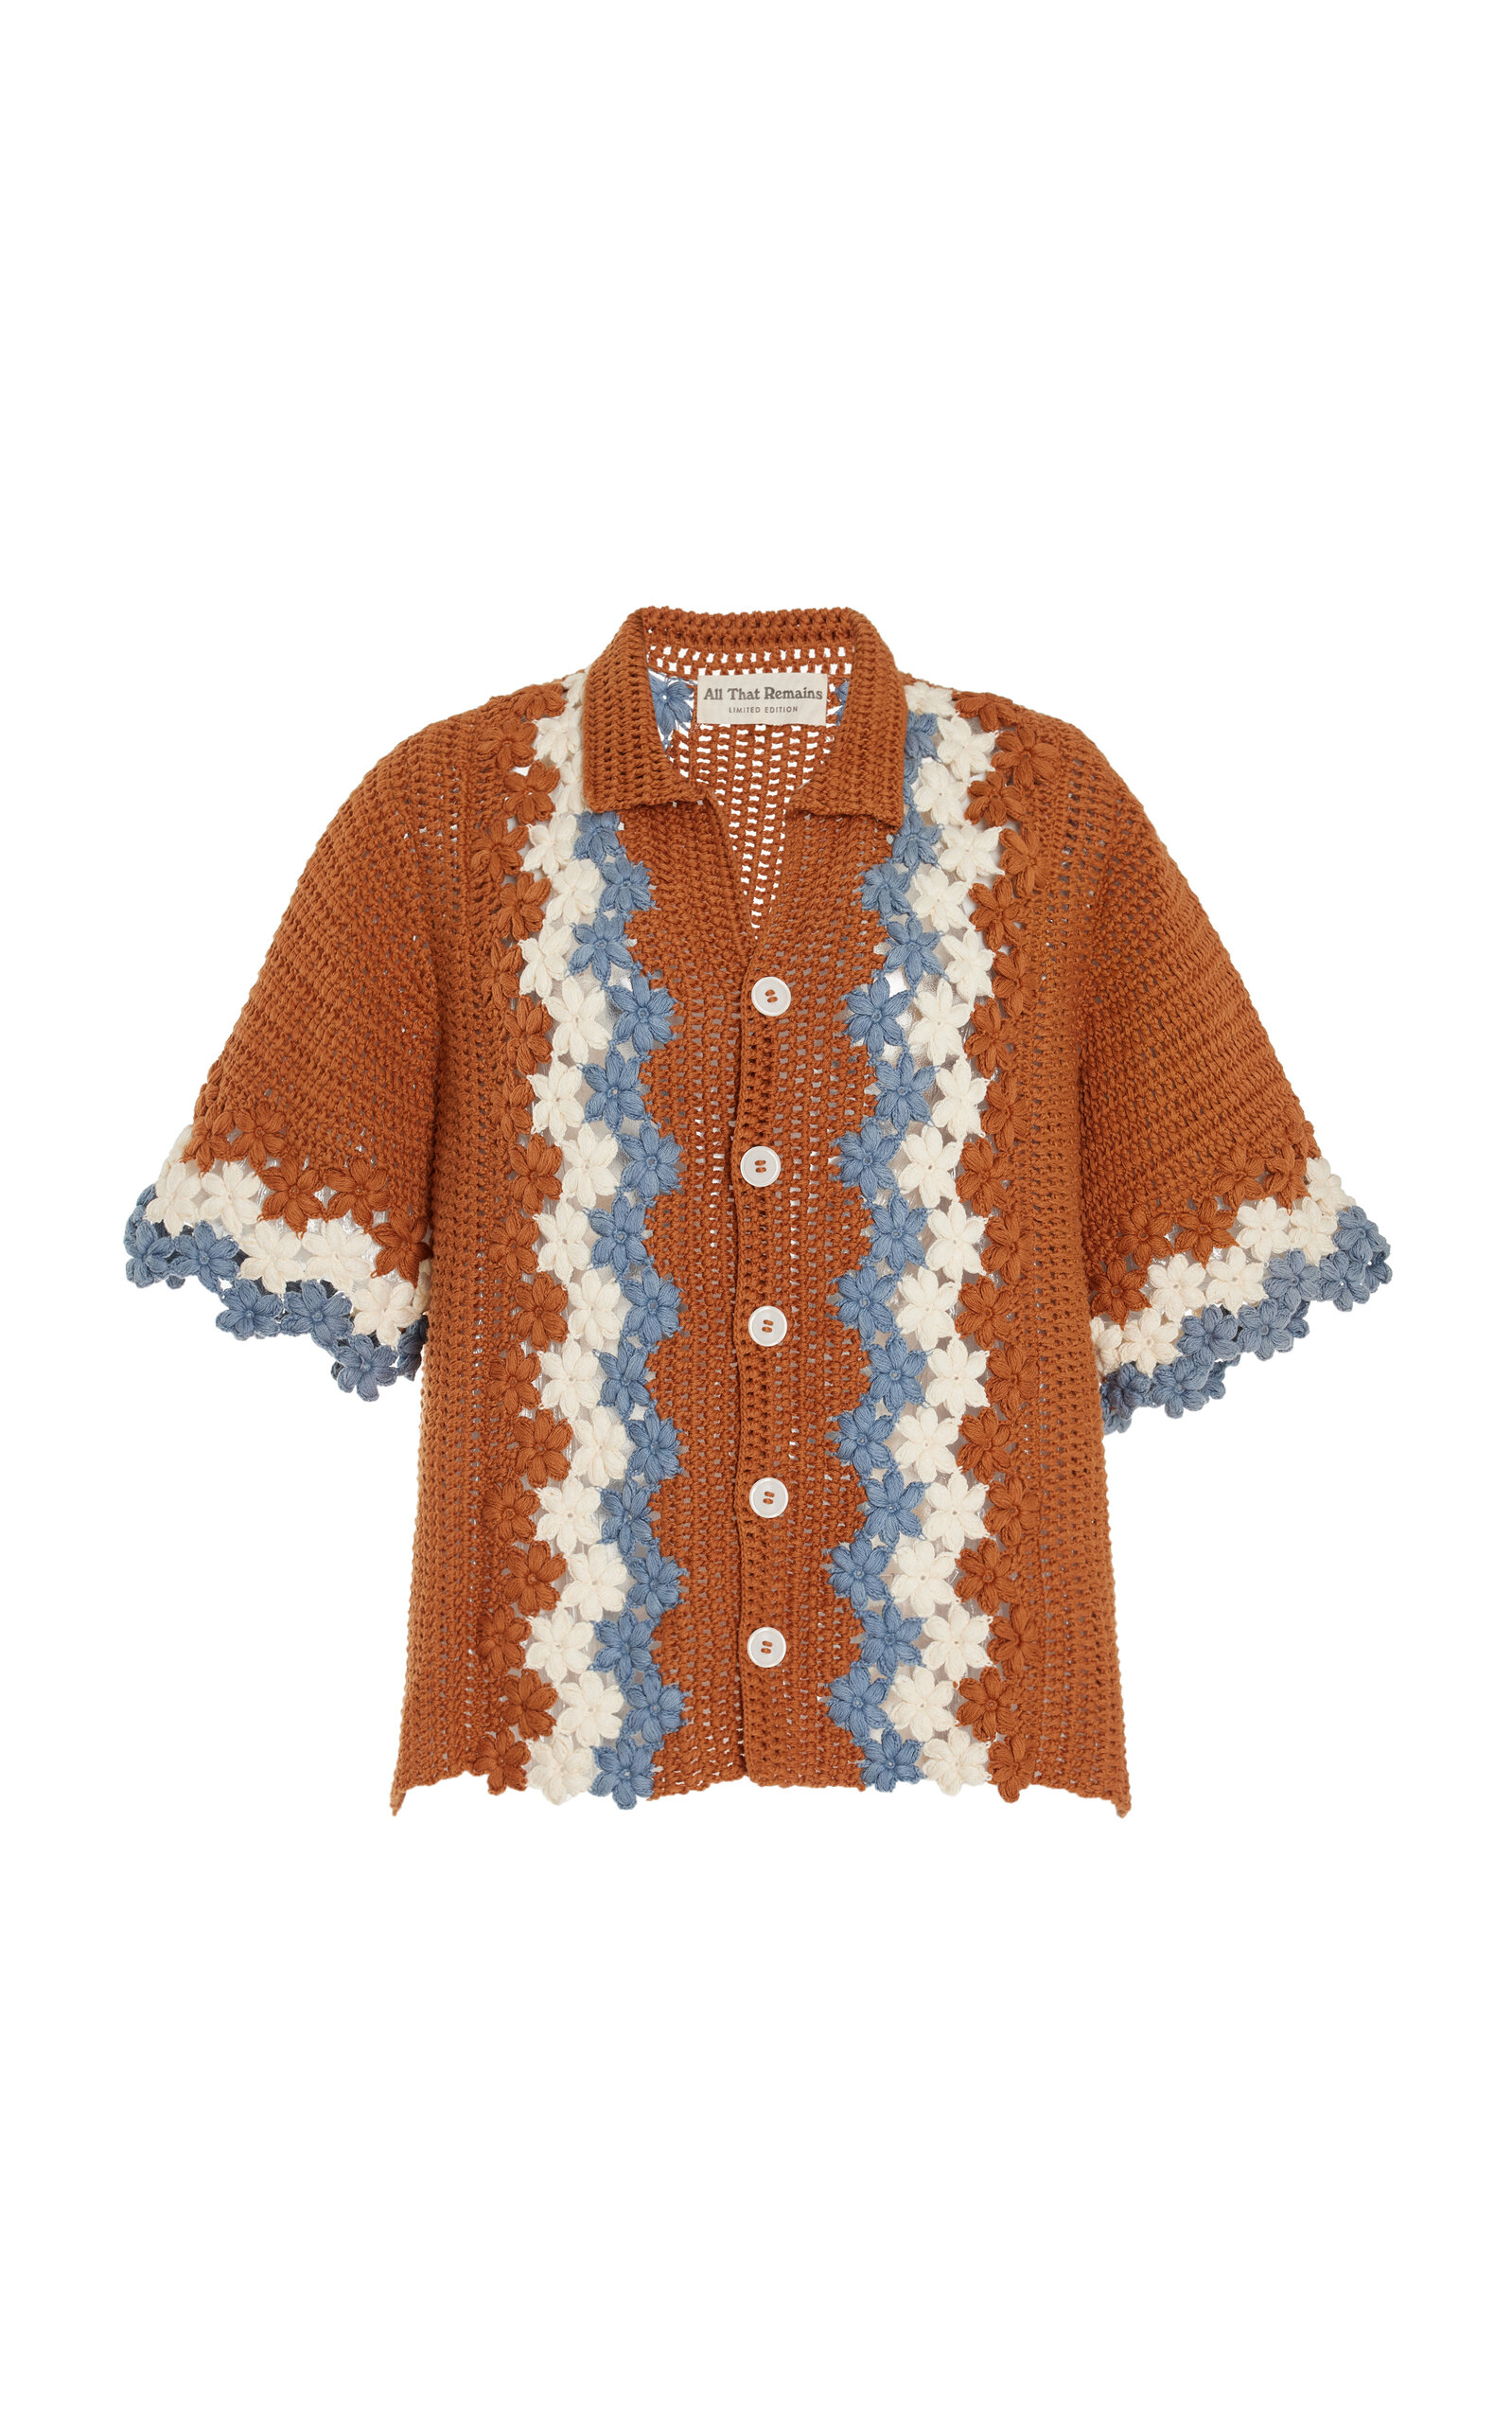 All That Remains Daisy Crocheted Cotton Shirt In Brown